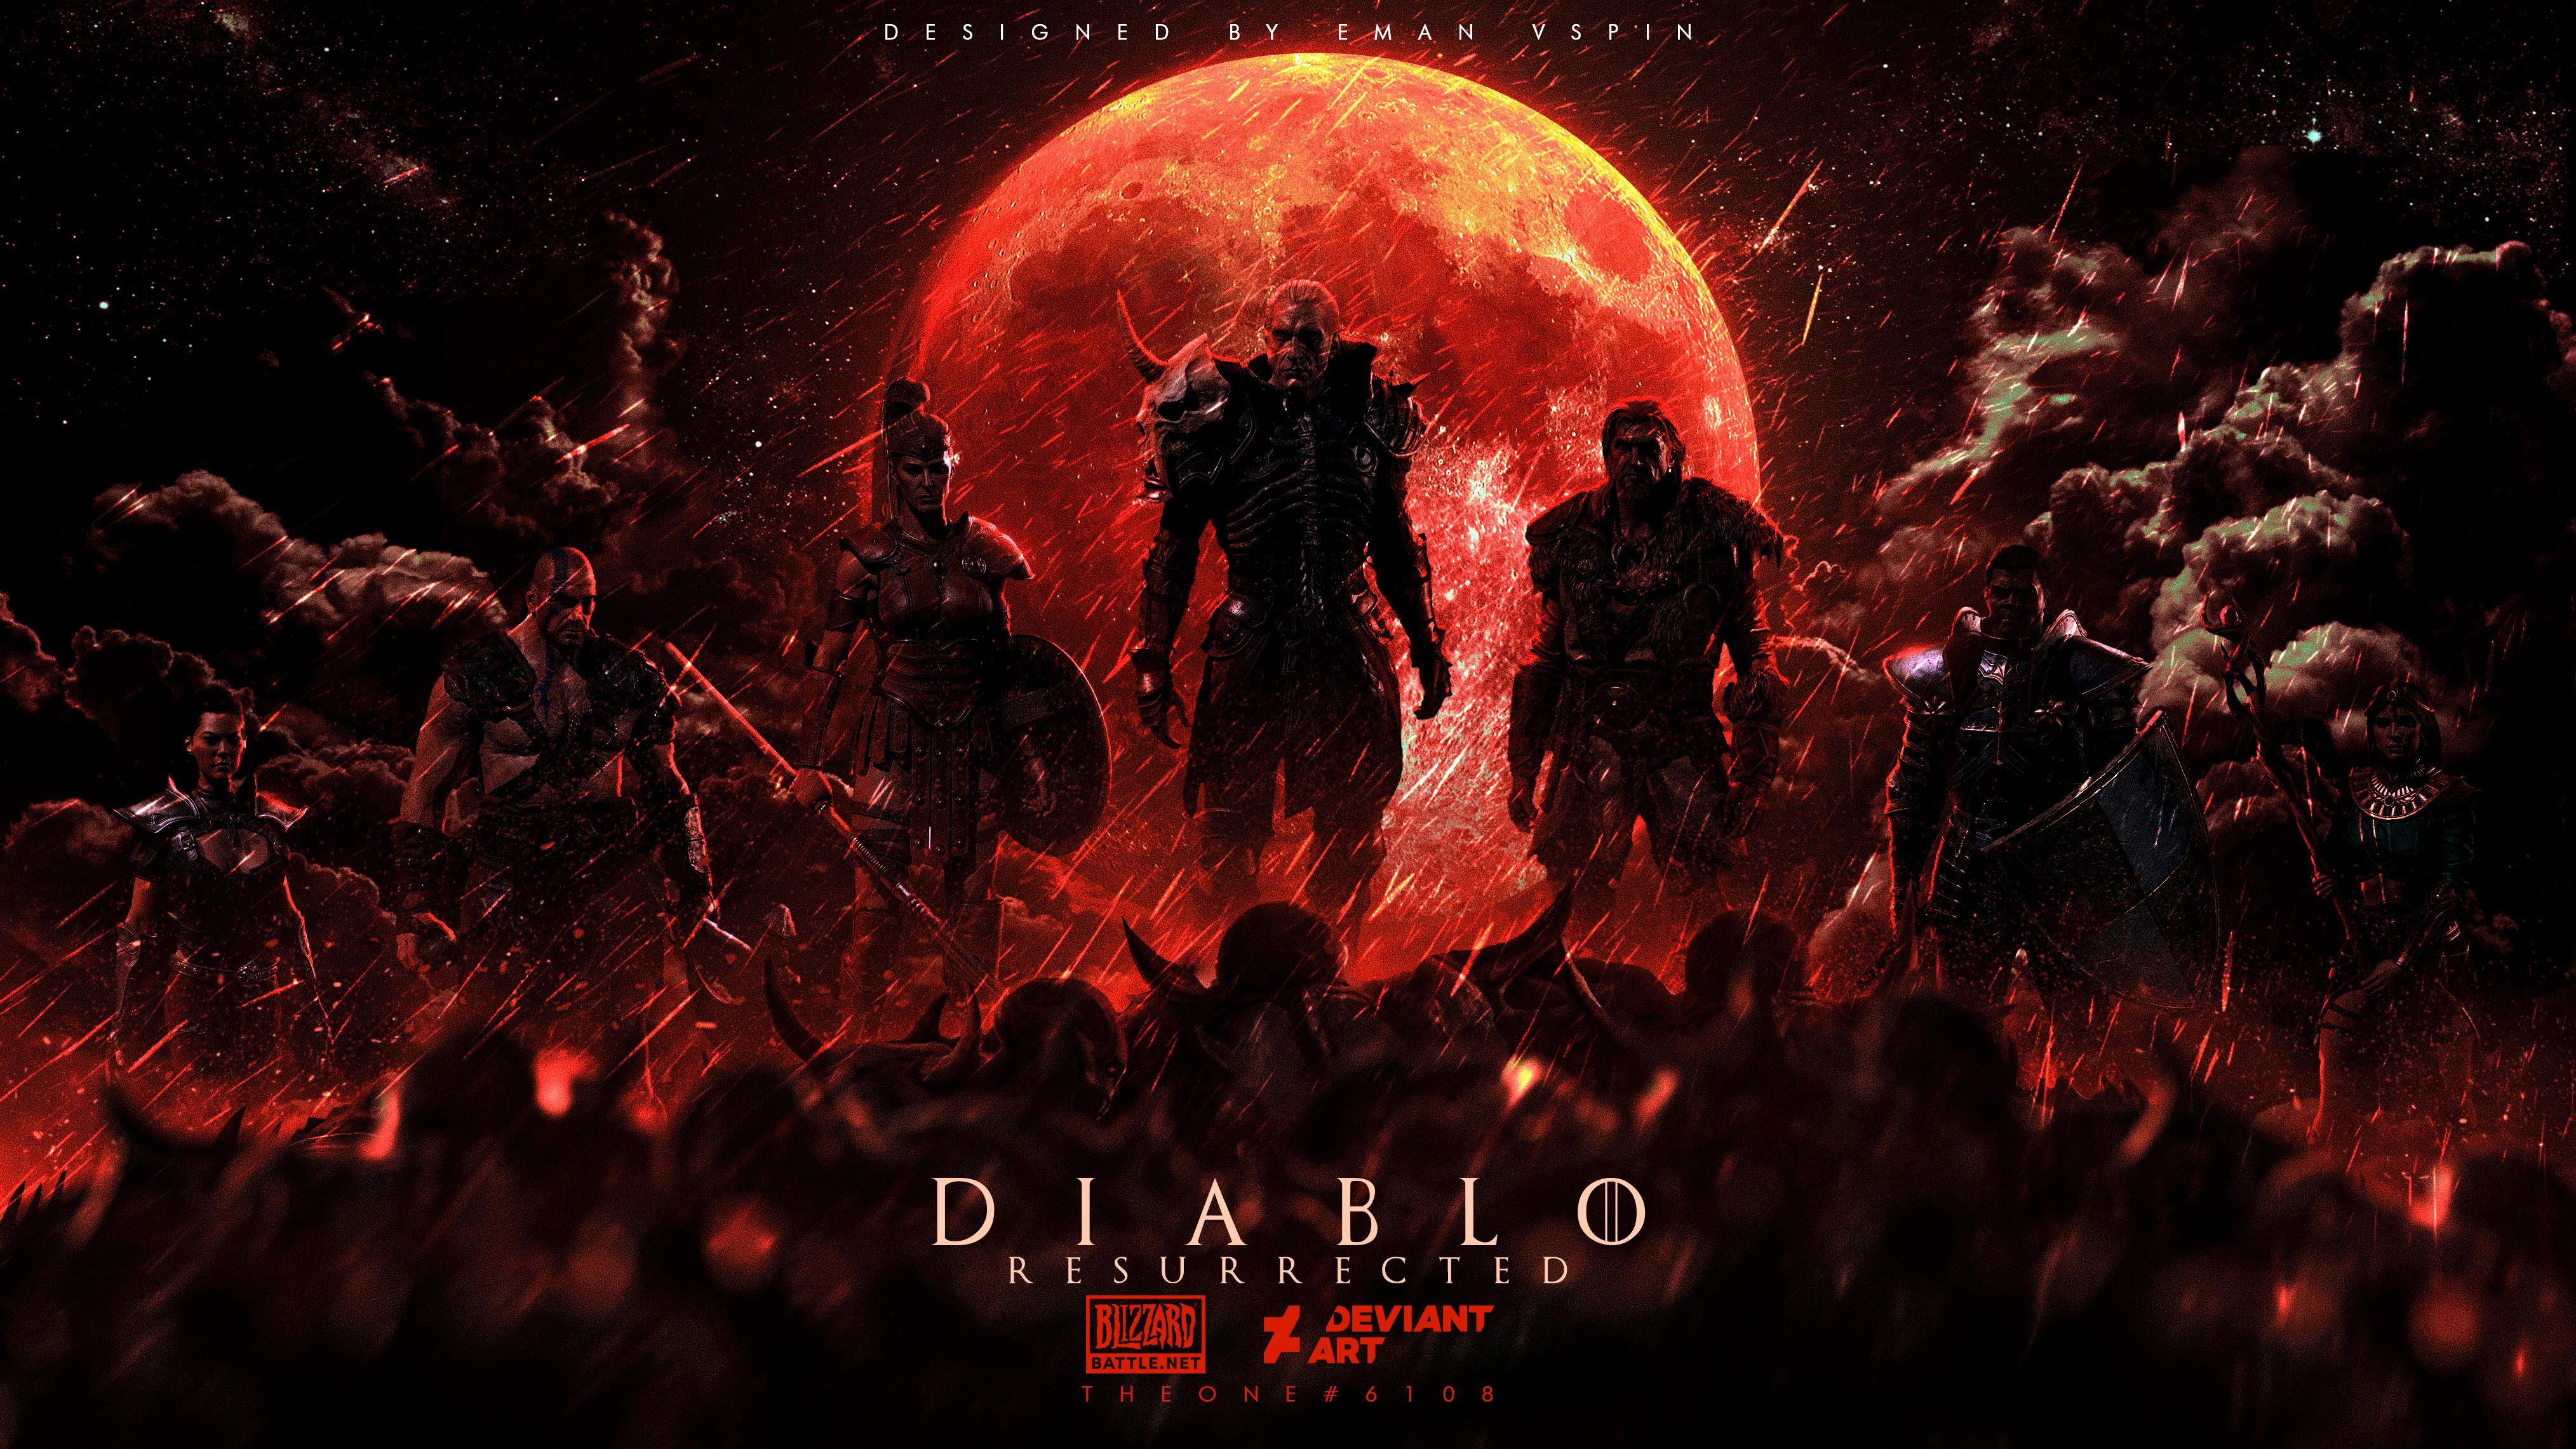 A storyline of "Diablo" is deeply buried, with angels and demons being toyed with by a witch.